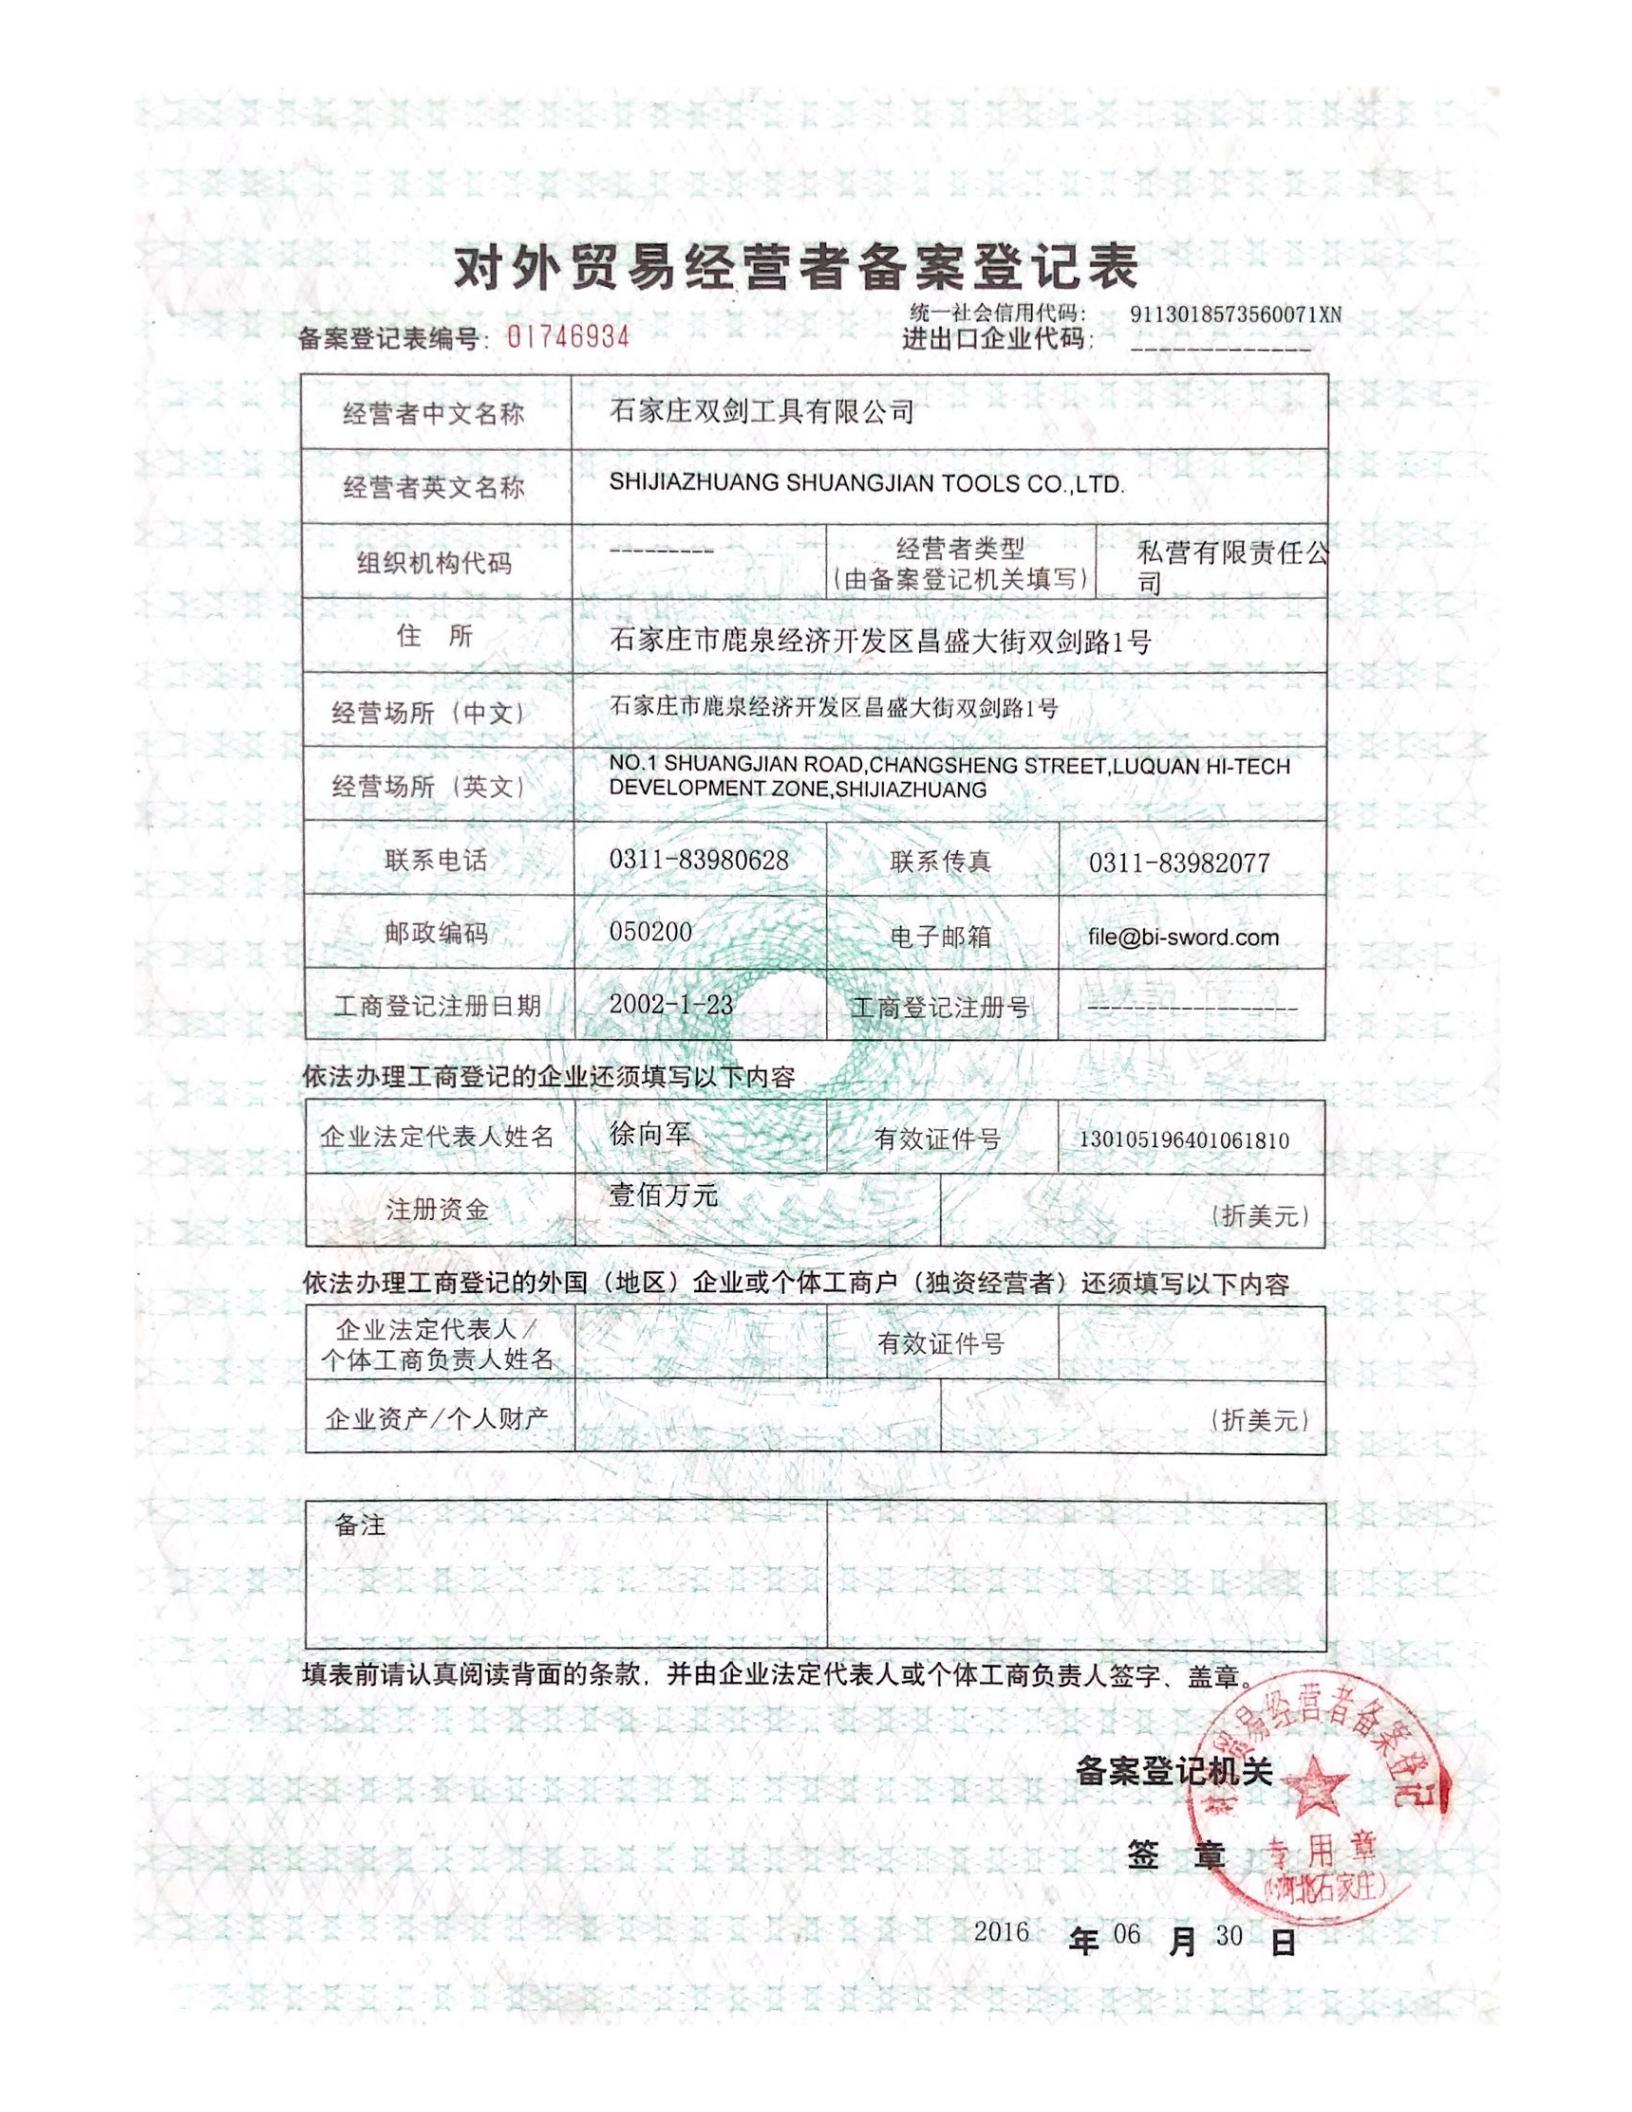 Registration Form for Foreign Trade Operators Certificate